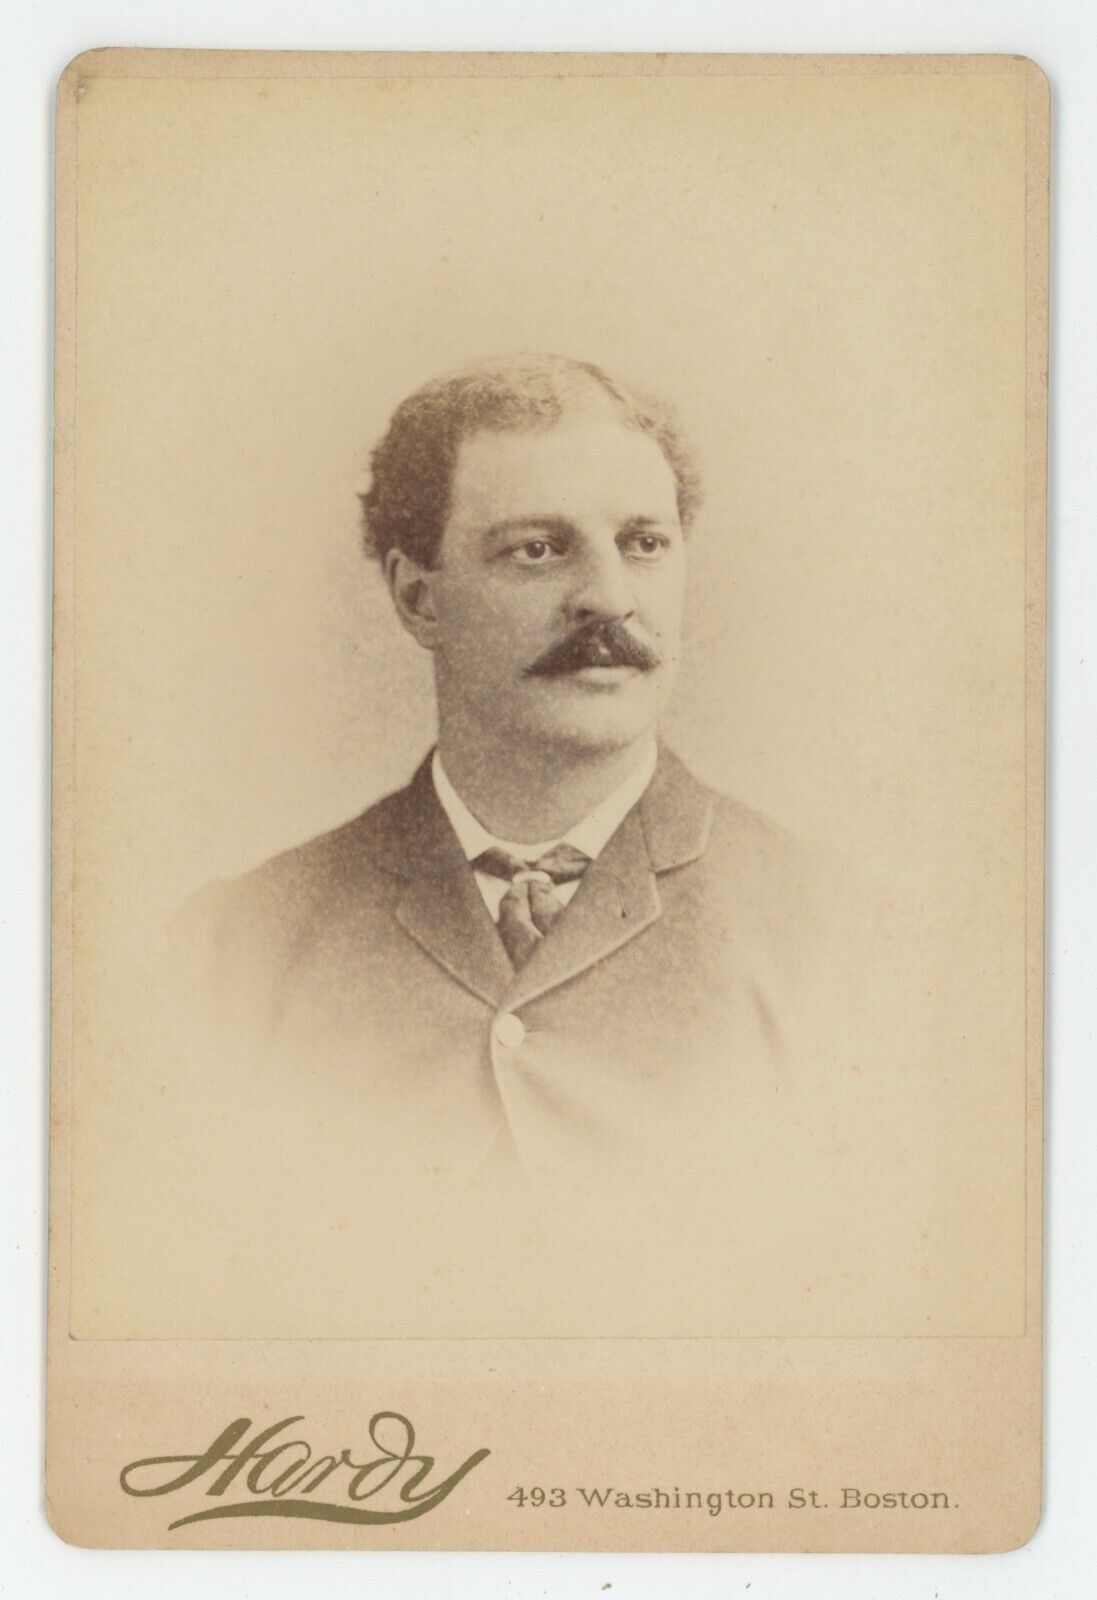 Antique c1880s Cabinet Card Unique Looking Man With Mustache Hardy Boston, MA